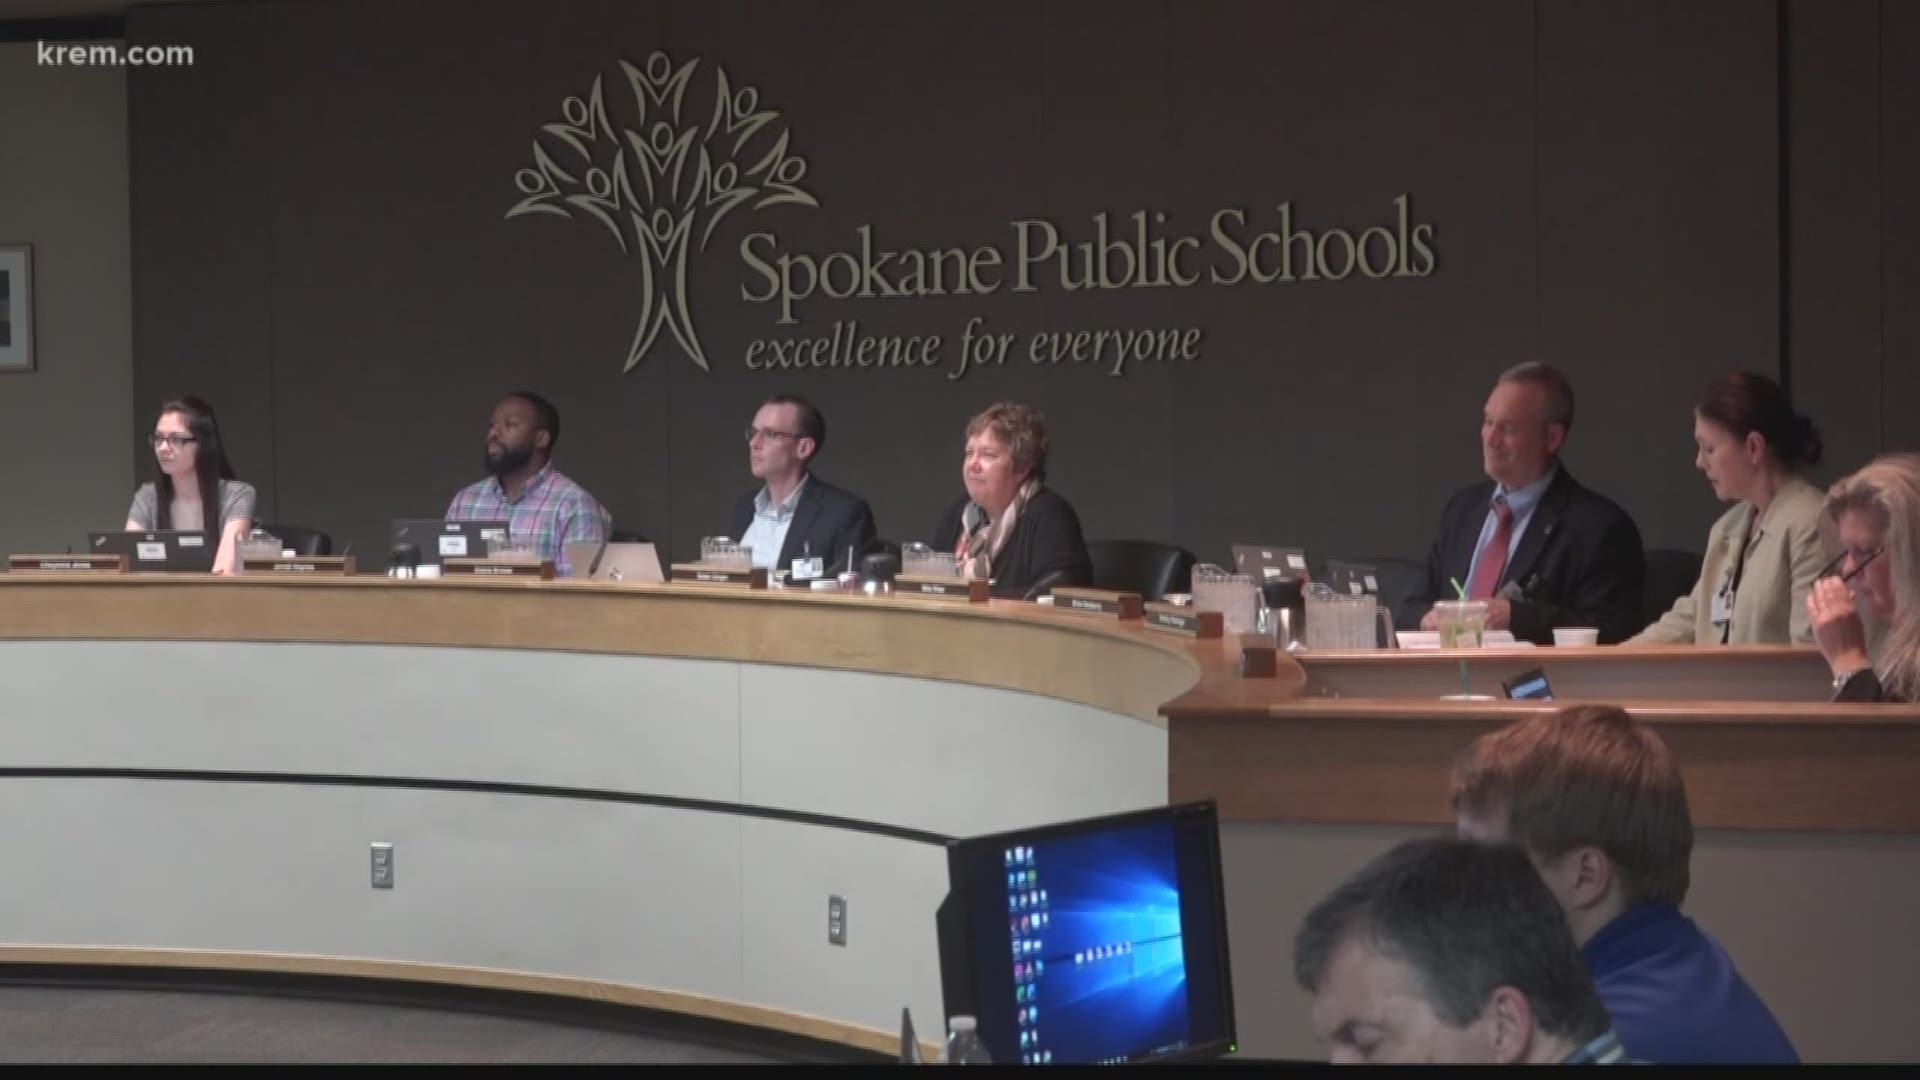 To compensate for a funding shortfall for next year, district leaders considered proposing a $21 million supplemental levy. The board declined the levy on Wednesday.